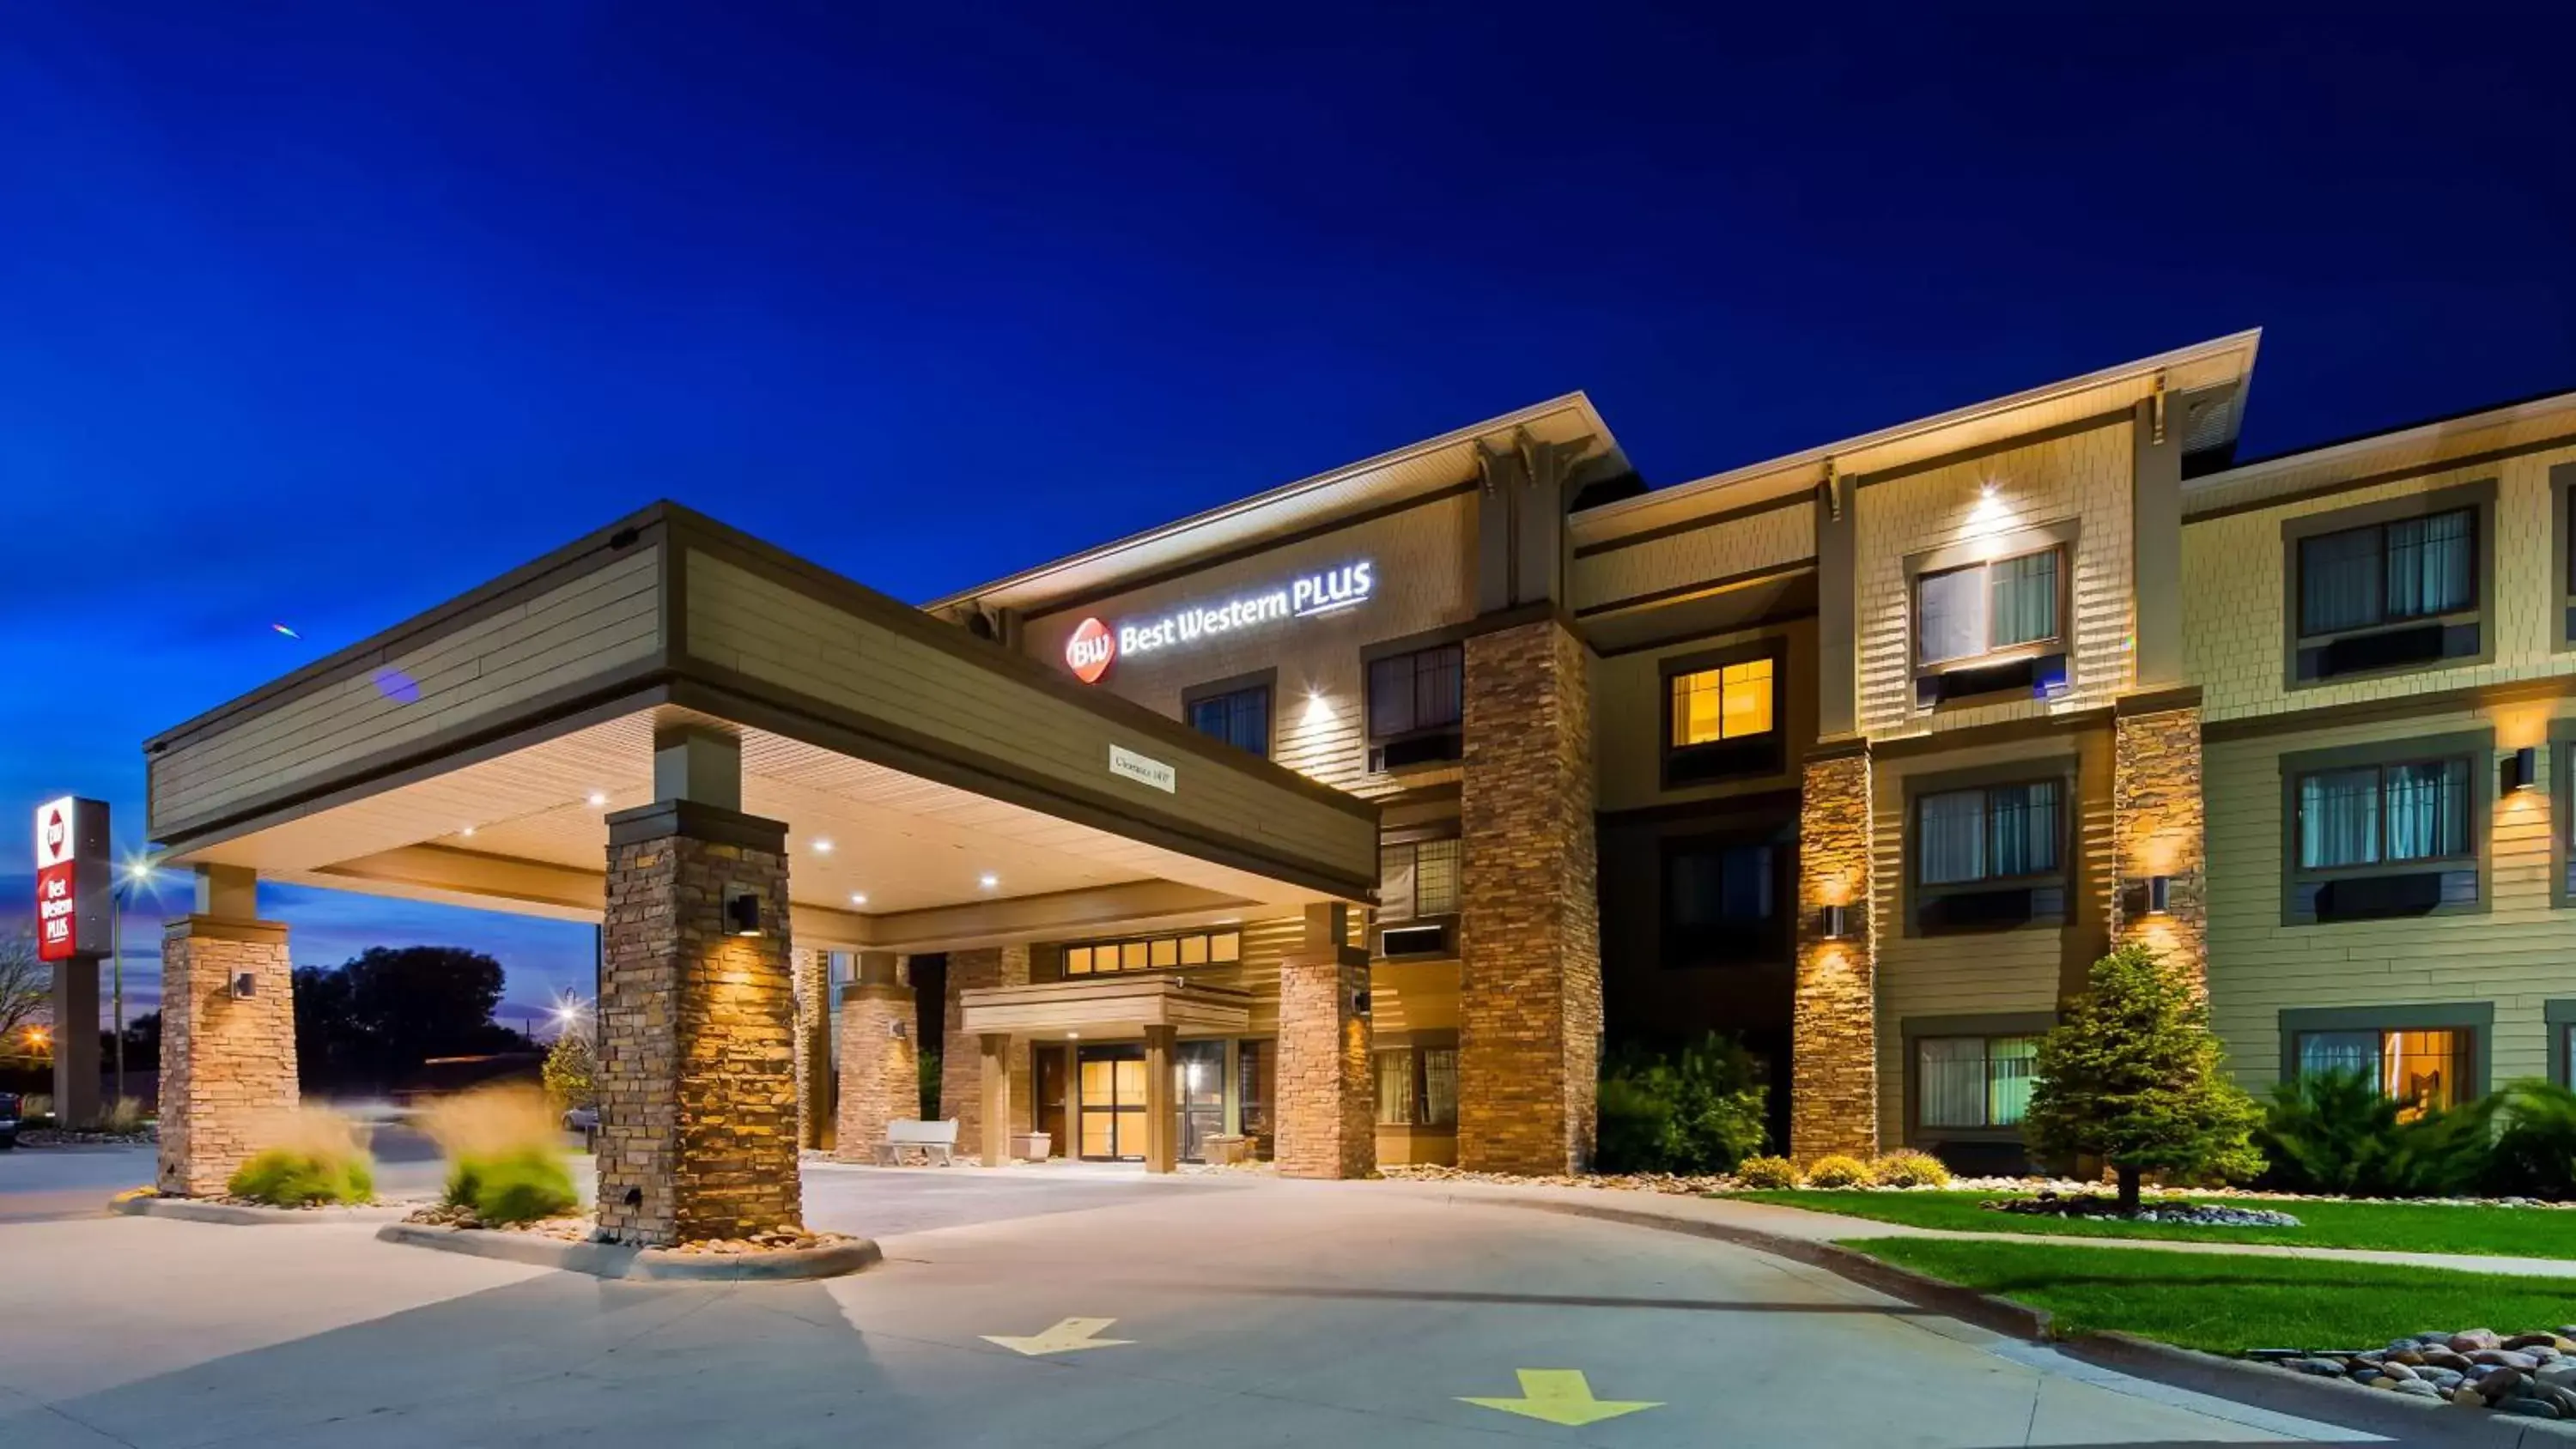 Property building in Best Western Plus Grand Island Inn and Suites